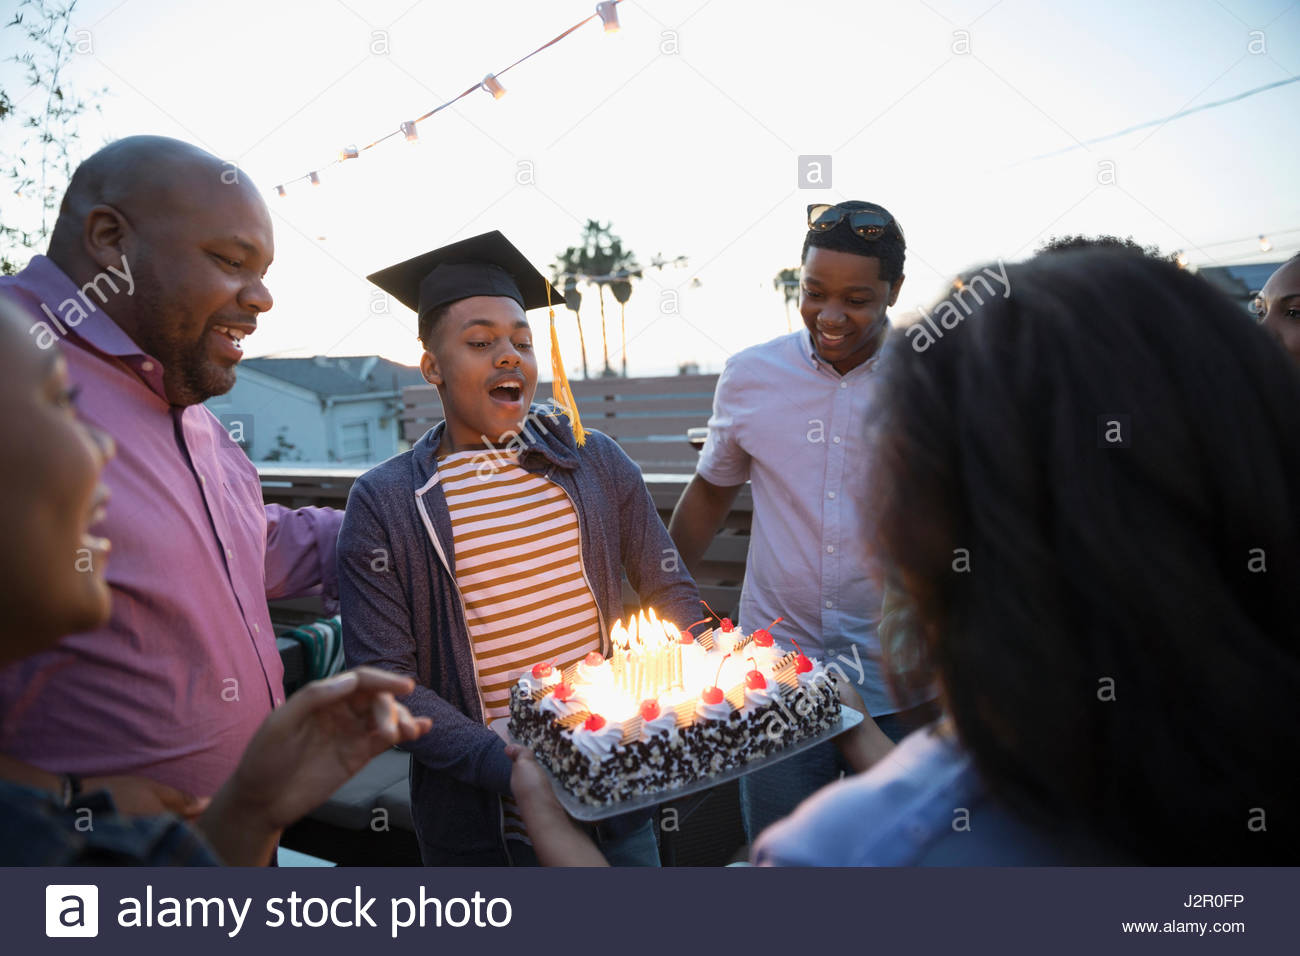 African American family celebrating graduation with cake on deck Stock Photo